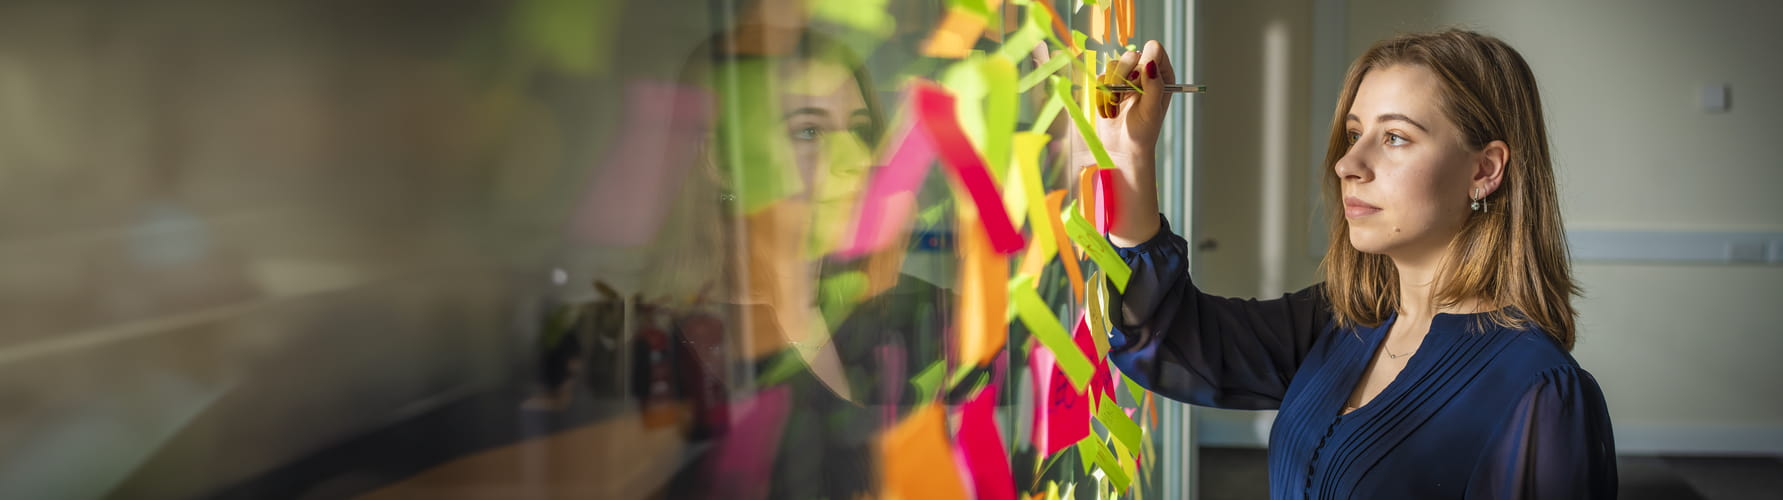 student arranging postit notes on a perspex screen